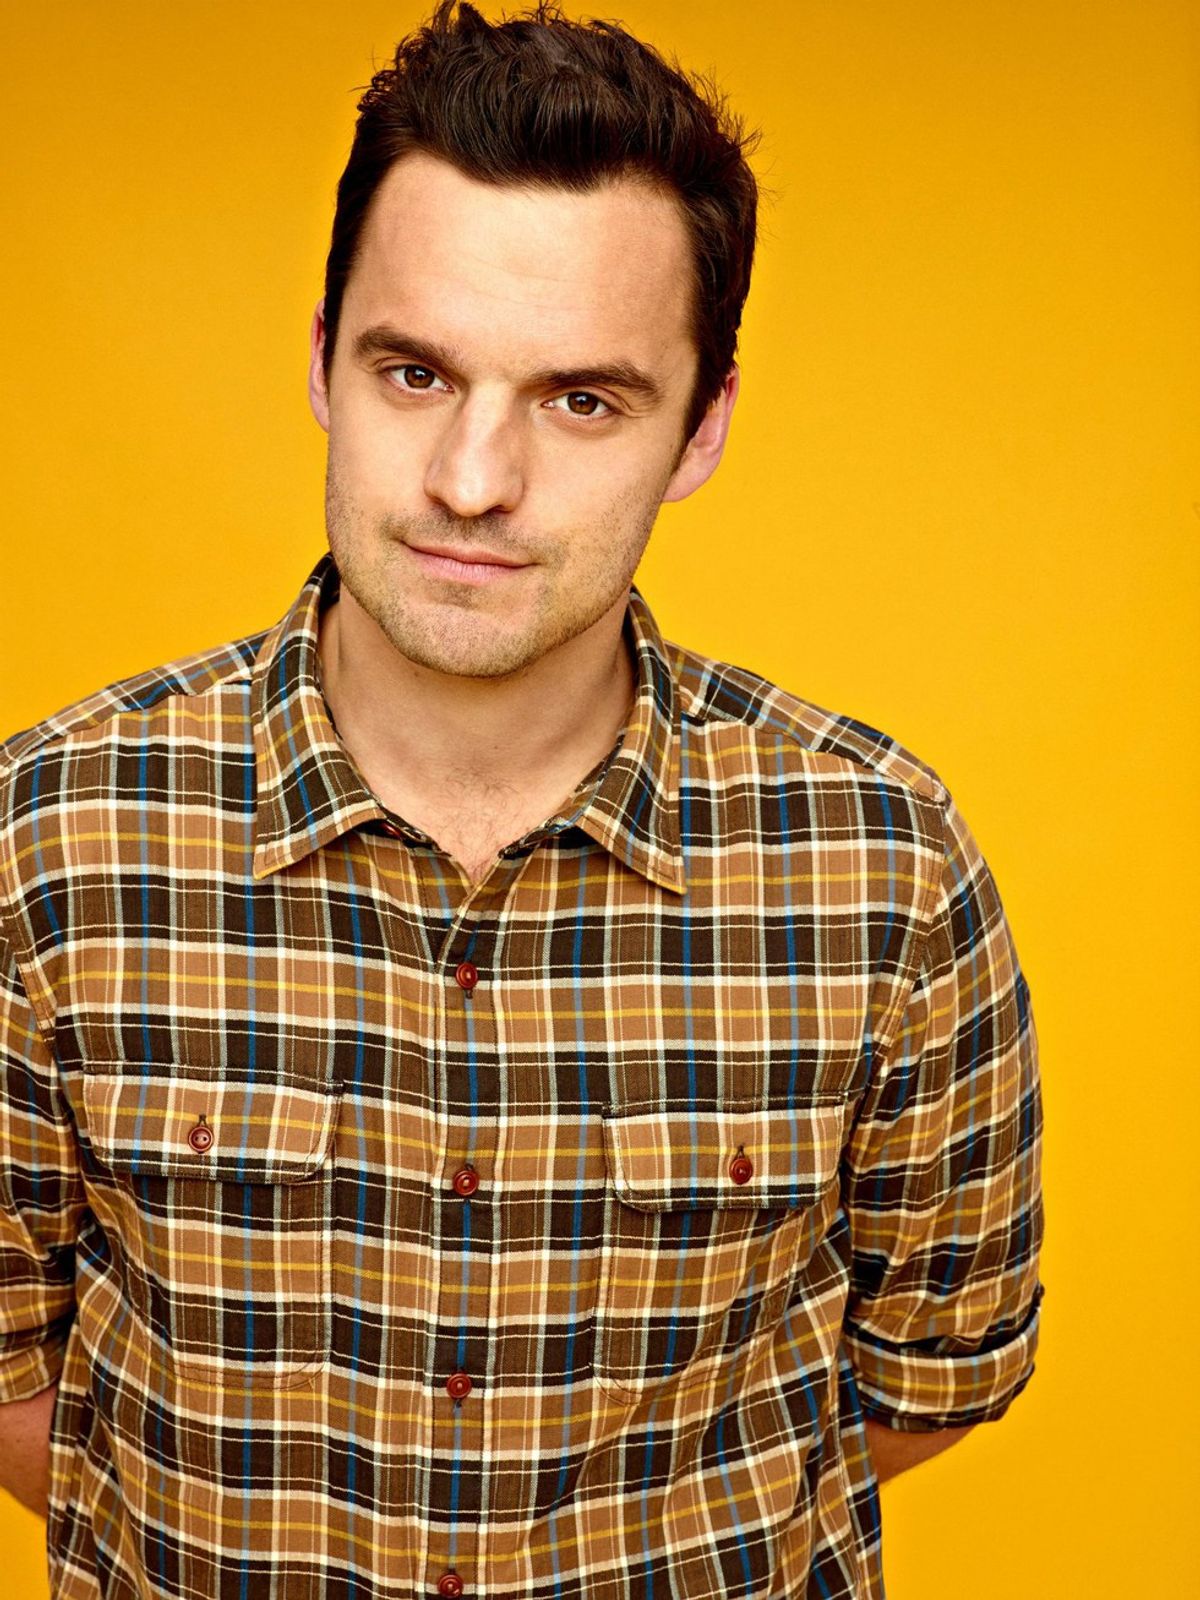 College First Semester Grades As Told By Nick Miller From 'The New Girl'